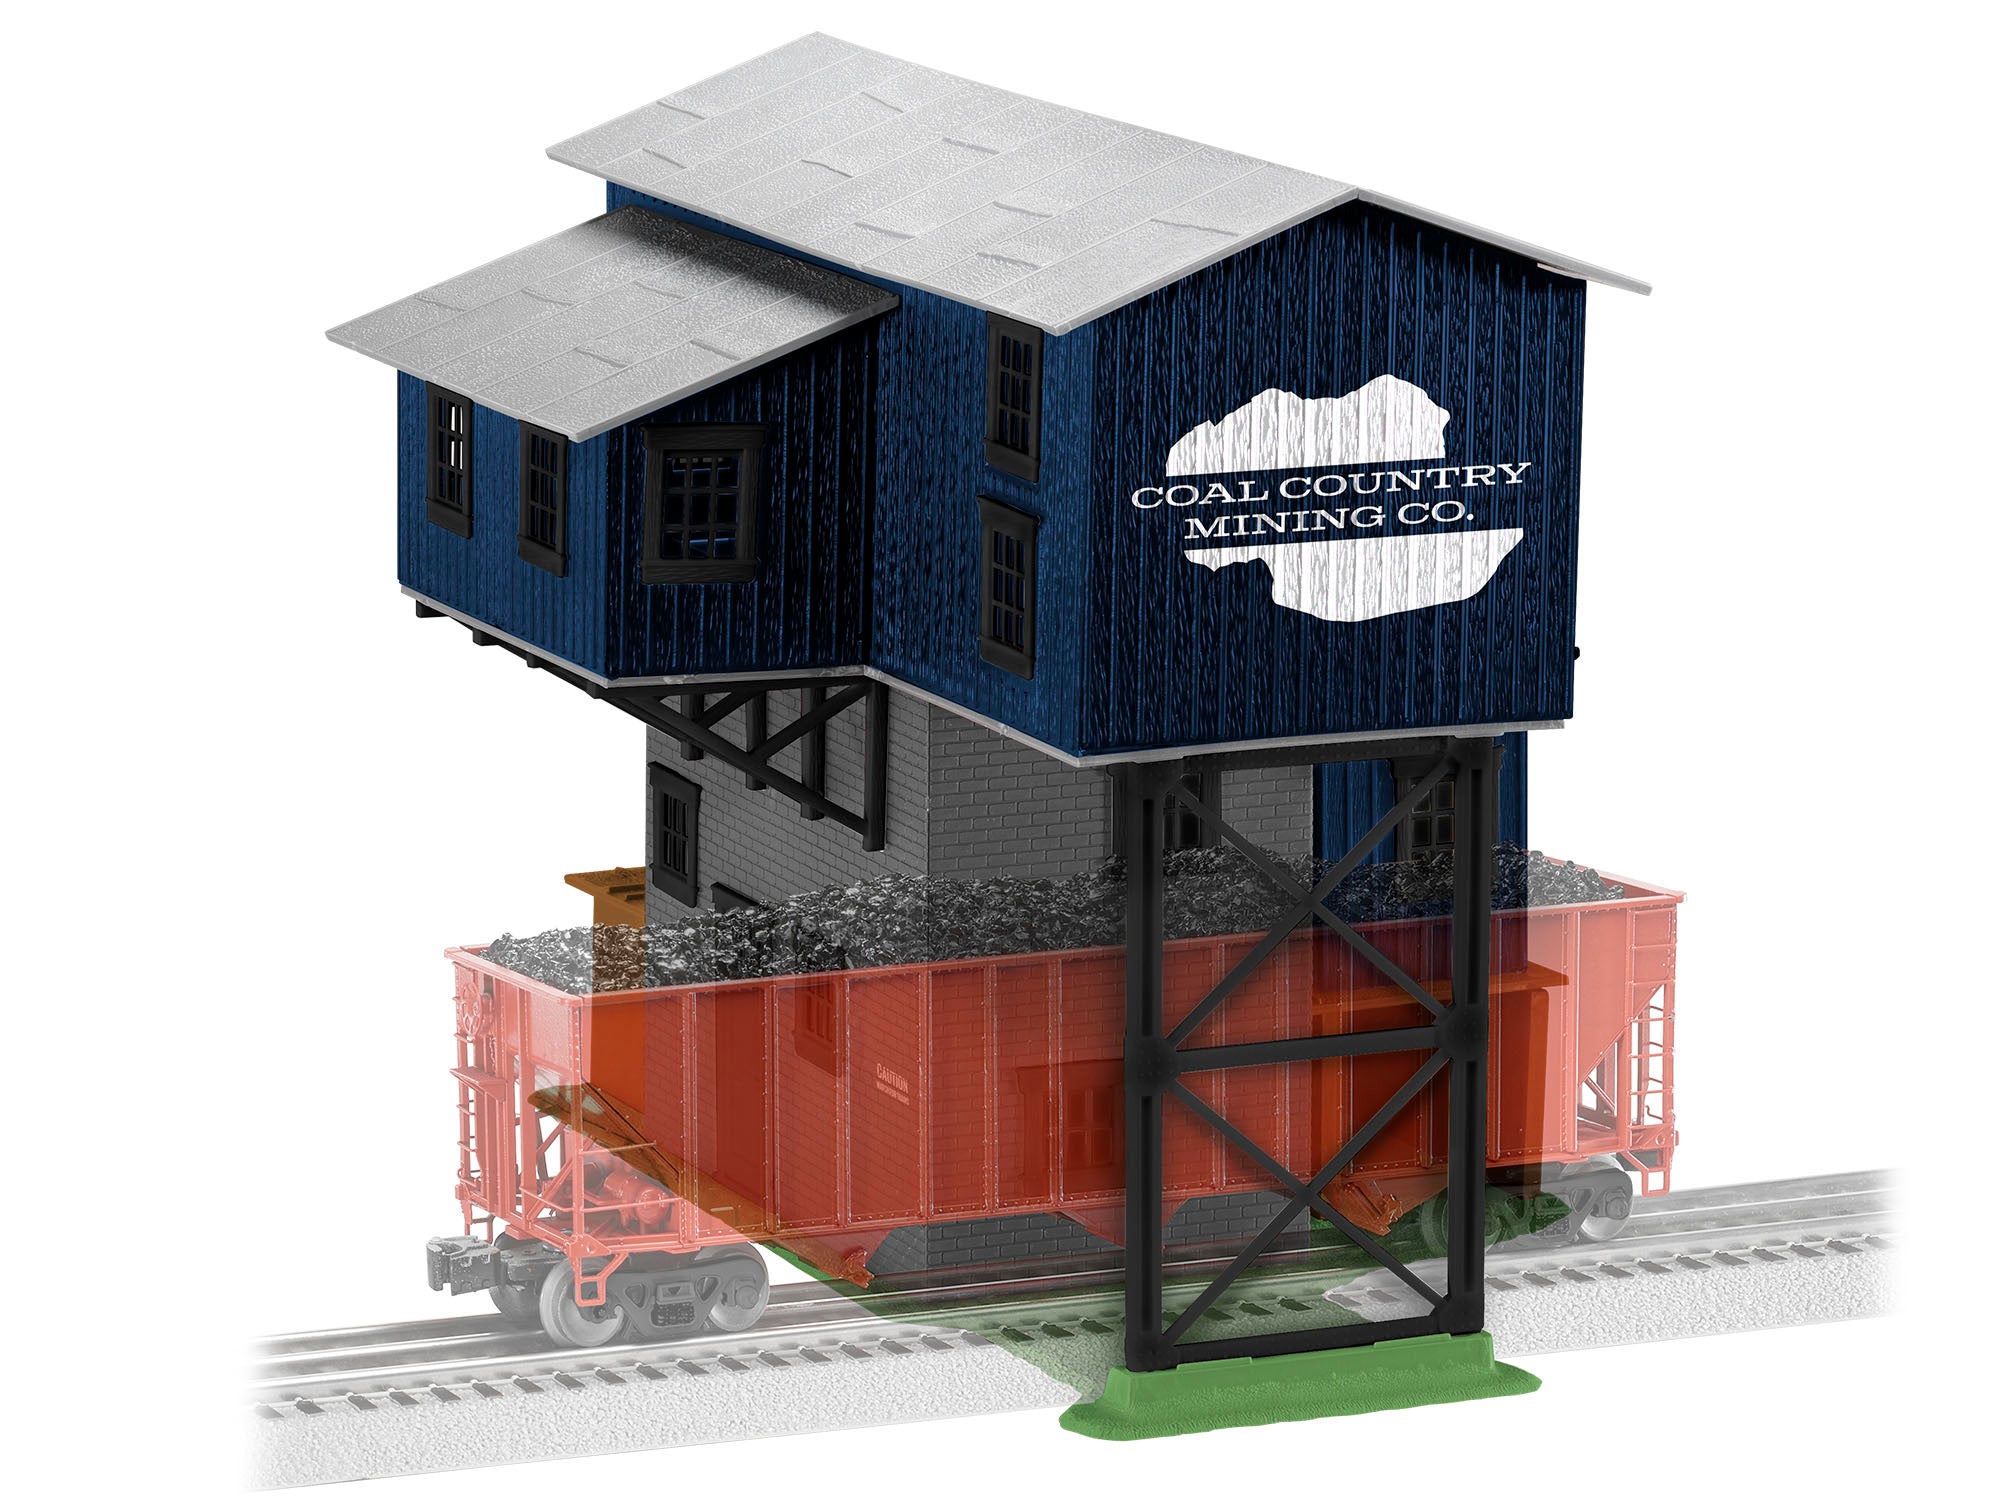 Lionel 2229310 - Coaling Station "Coal Country Mining Co."